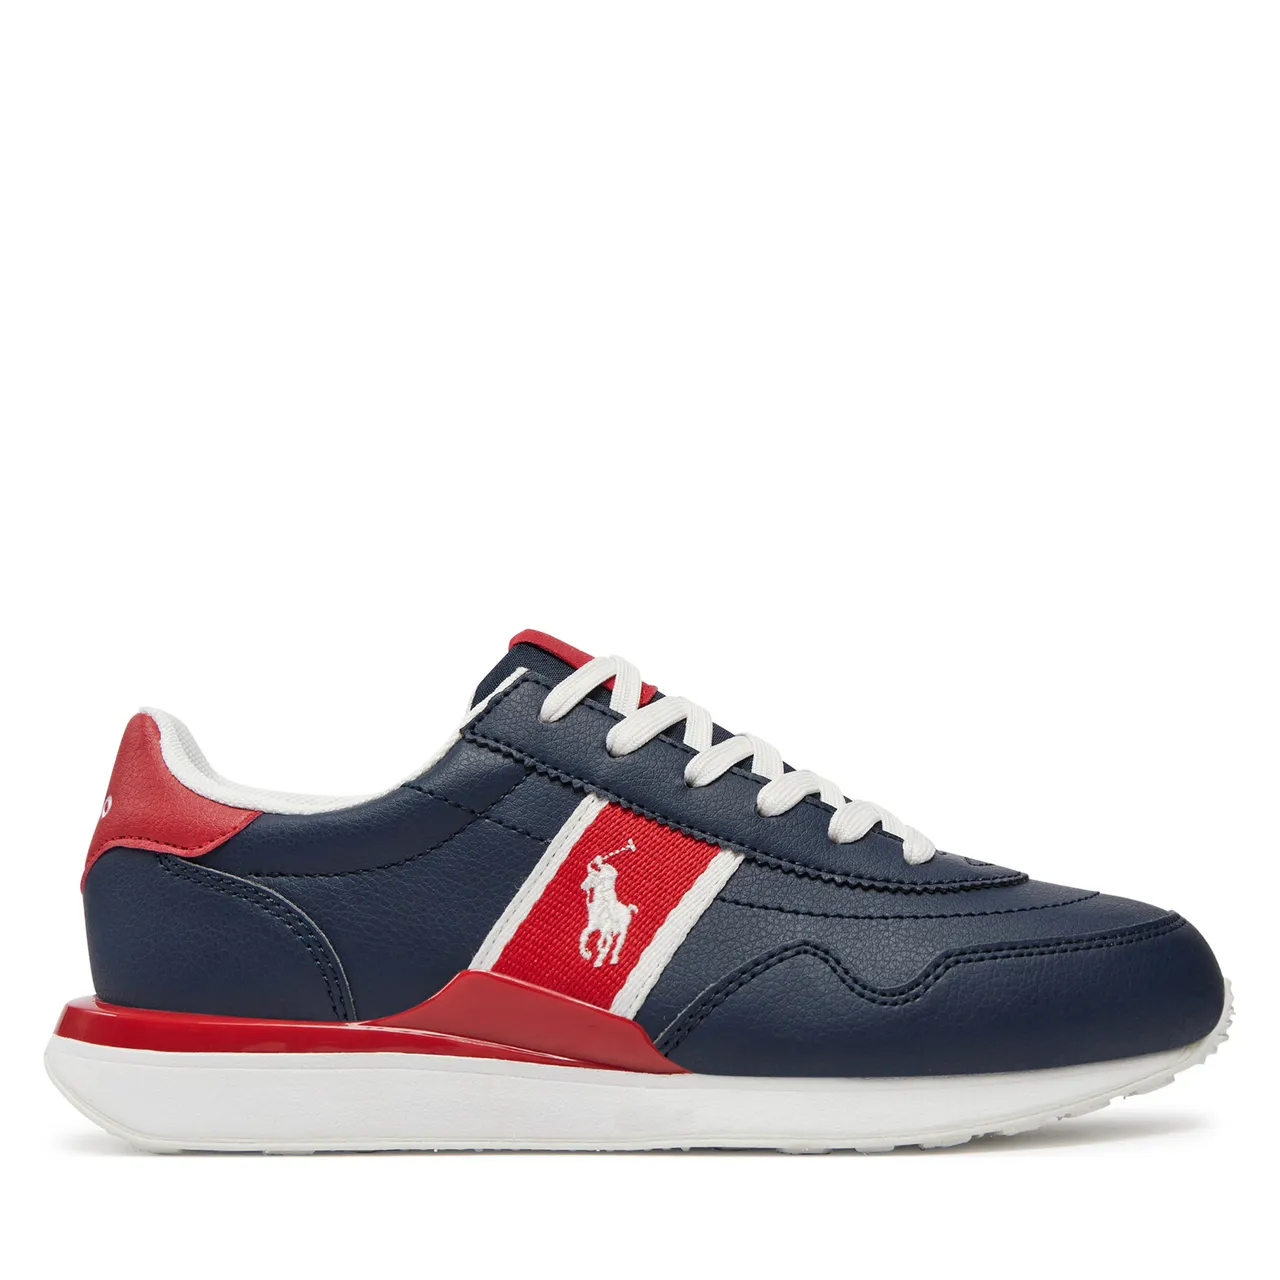 Sneakers Polo Ralph Lauren RL00606410 J Navy Tumbled/Red W/ White Pp